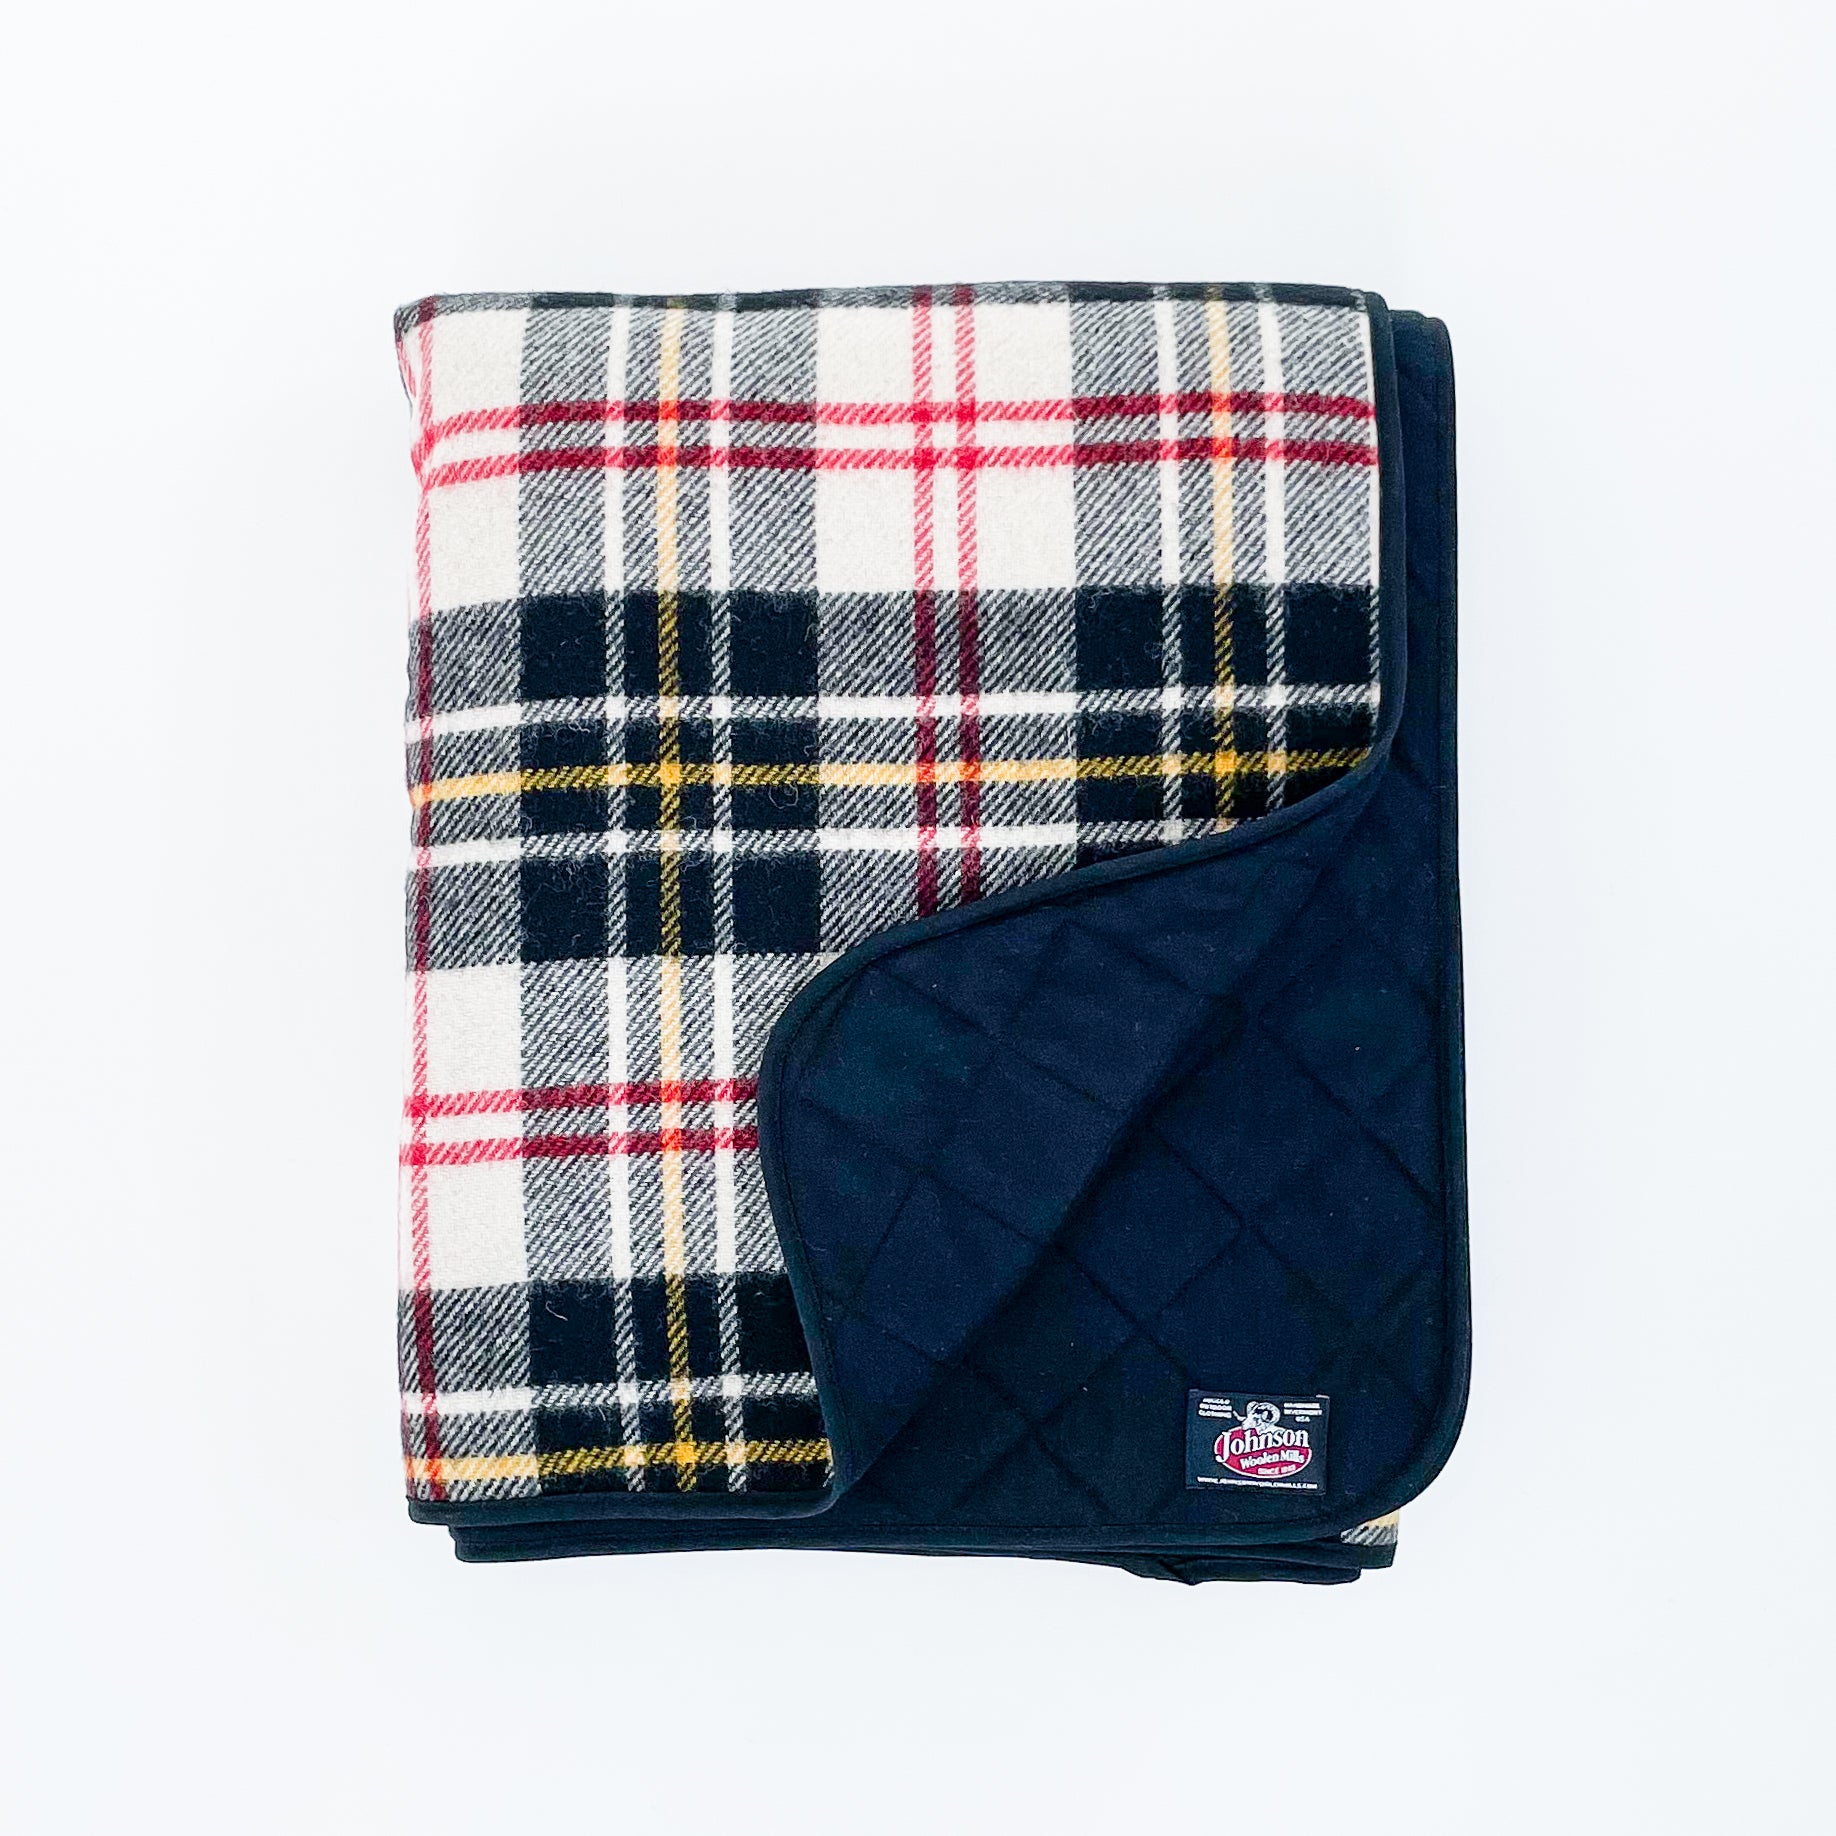 Johnson Woolen Mills Throw Flannel Lined Blanket black/white/yellow/red plaid outside & blue lining inside opened view folded